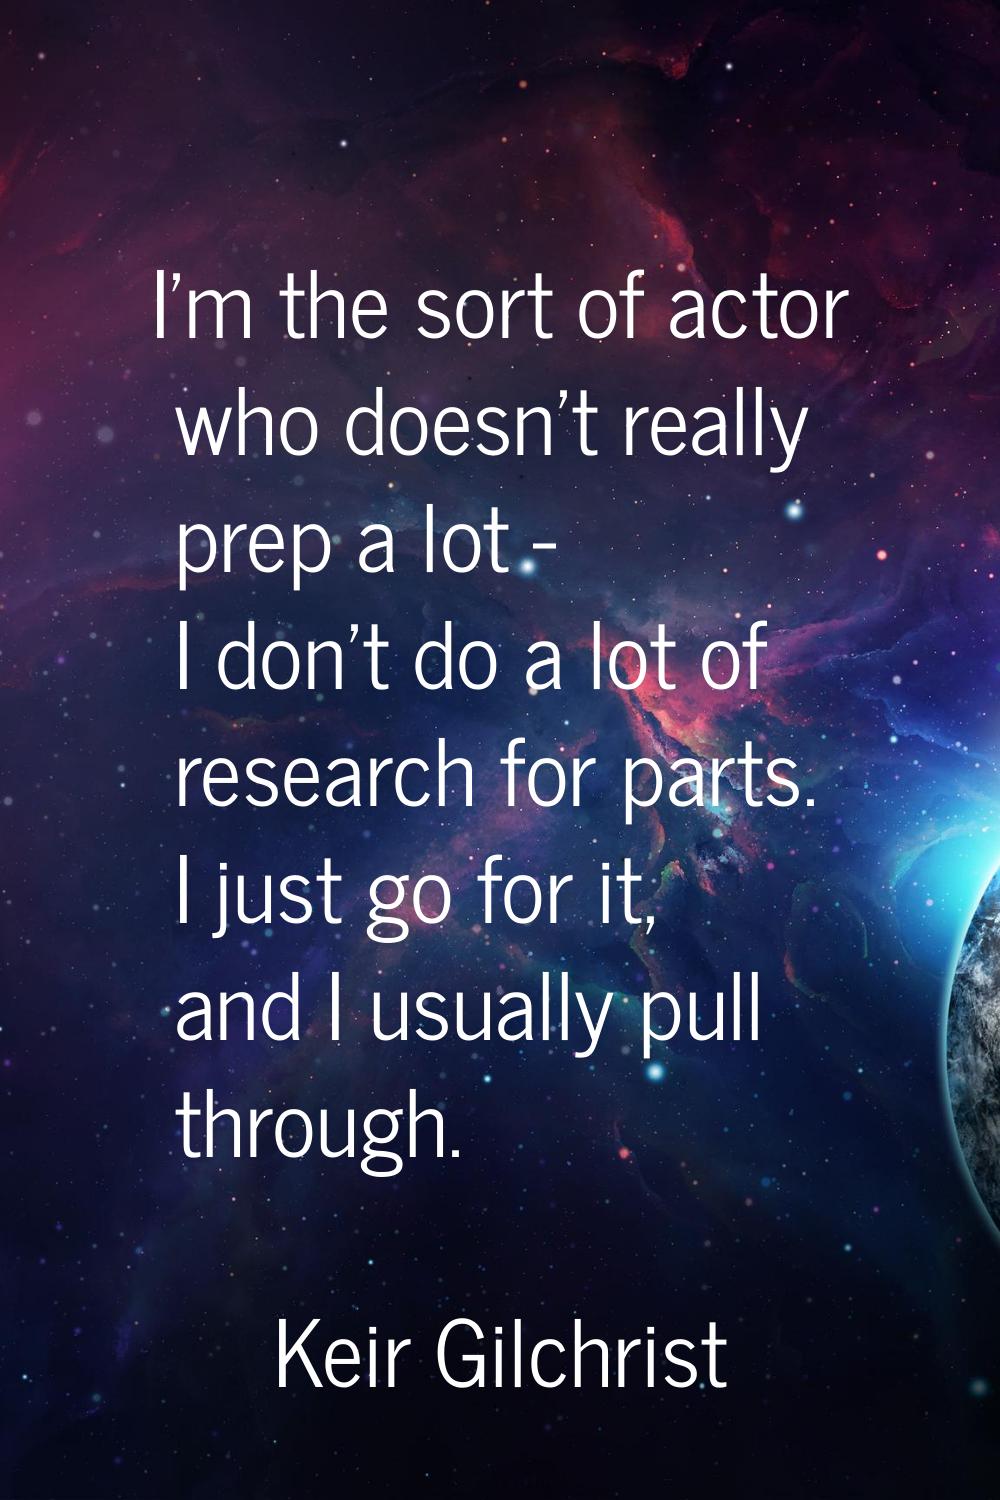 I'm the sort of actor who doesn't really prep a lot - I don't do a lot of research for parts. I jus